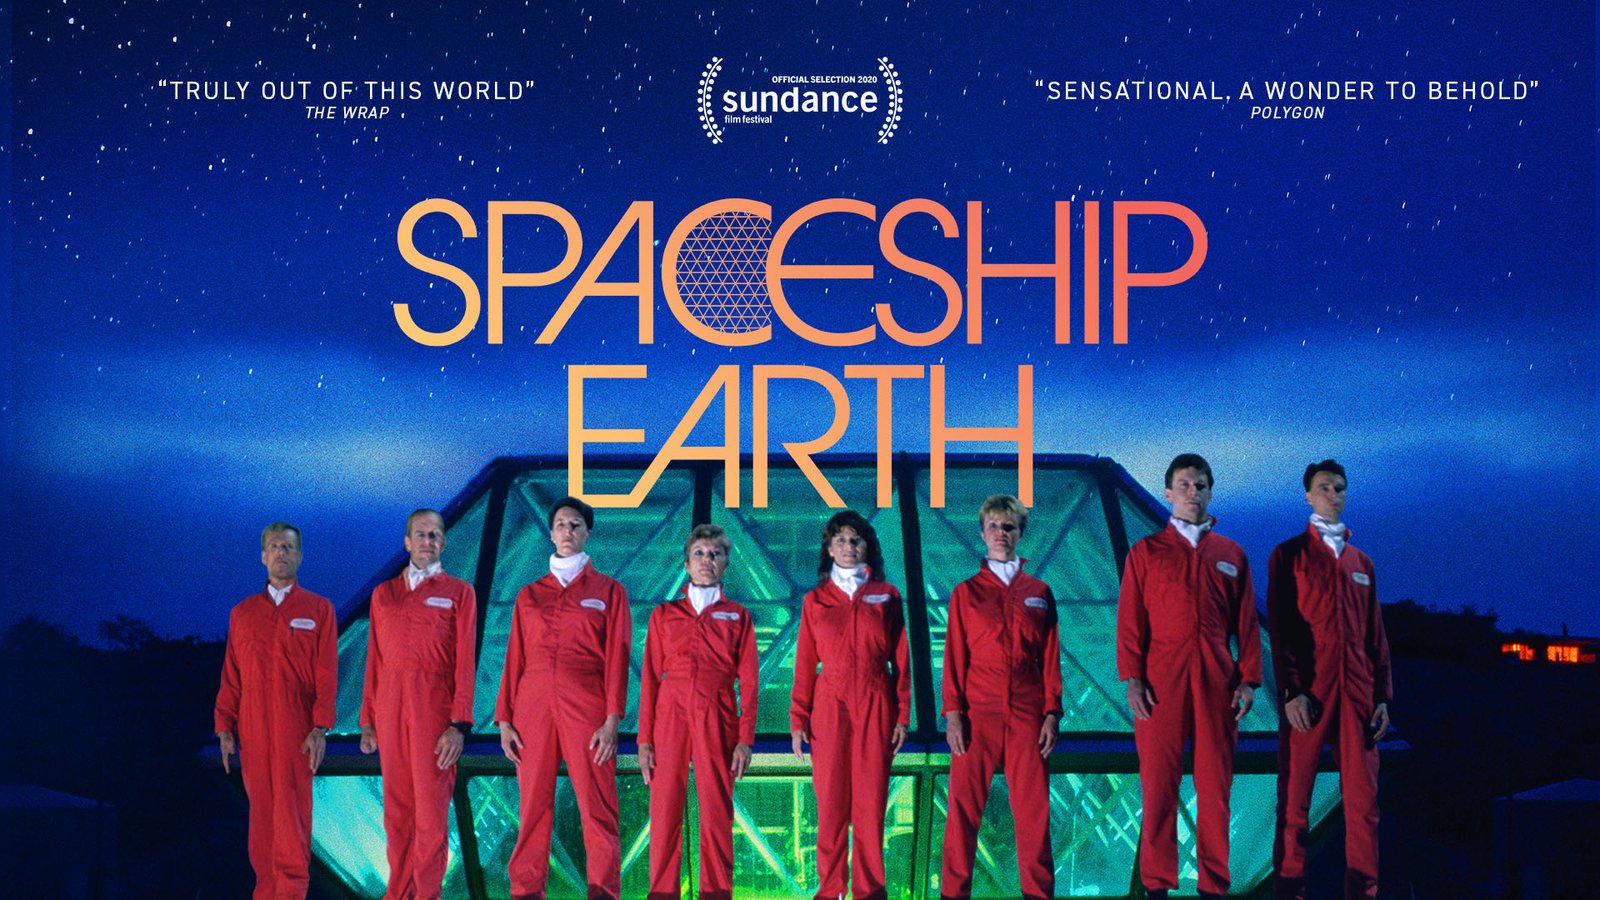 Poster for documentary film Spaceship Earth